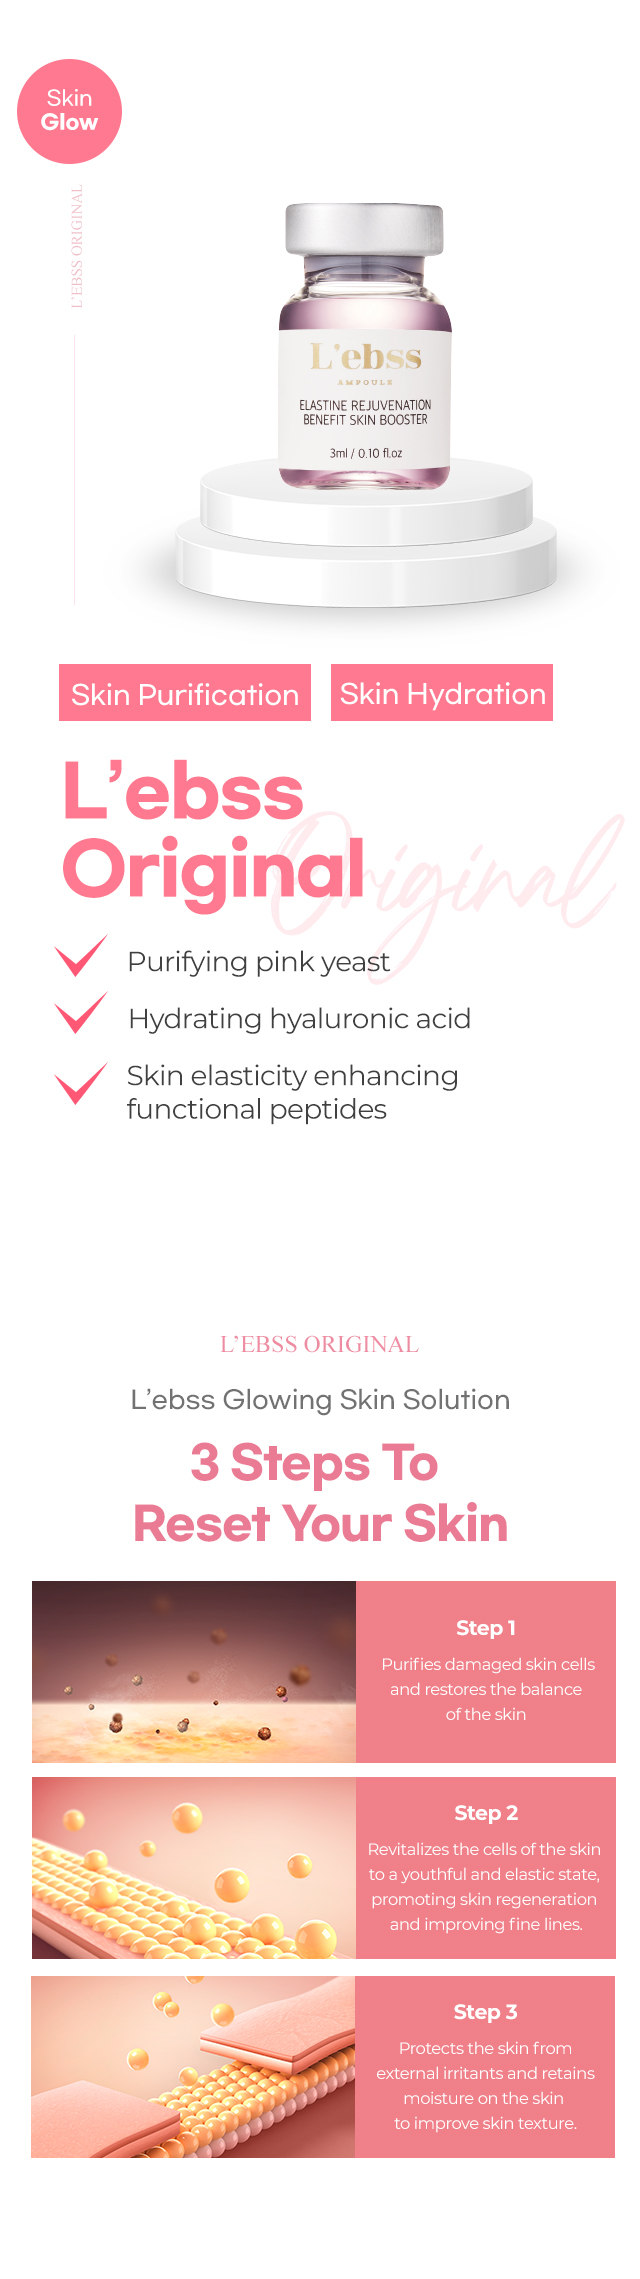 L'ebss Original MTS Microneedling skin booster descriptive page microneedling treatment for hydration, and glass skin in Korea